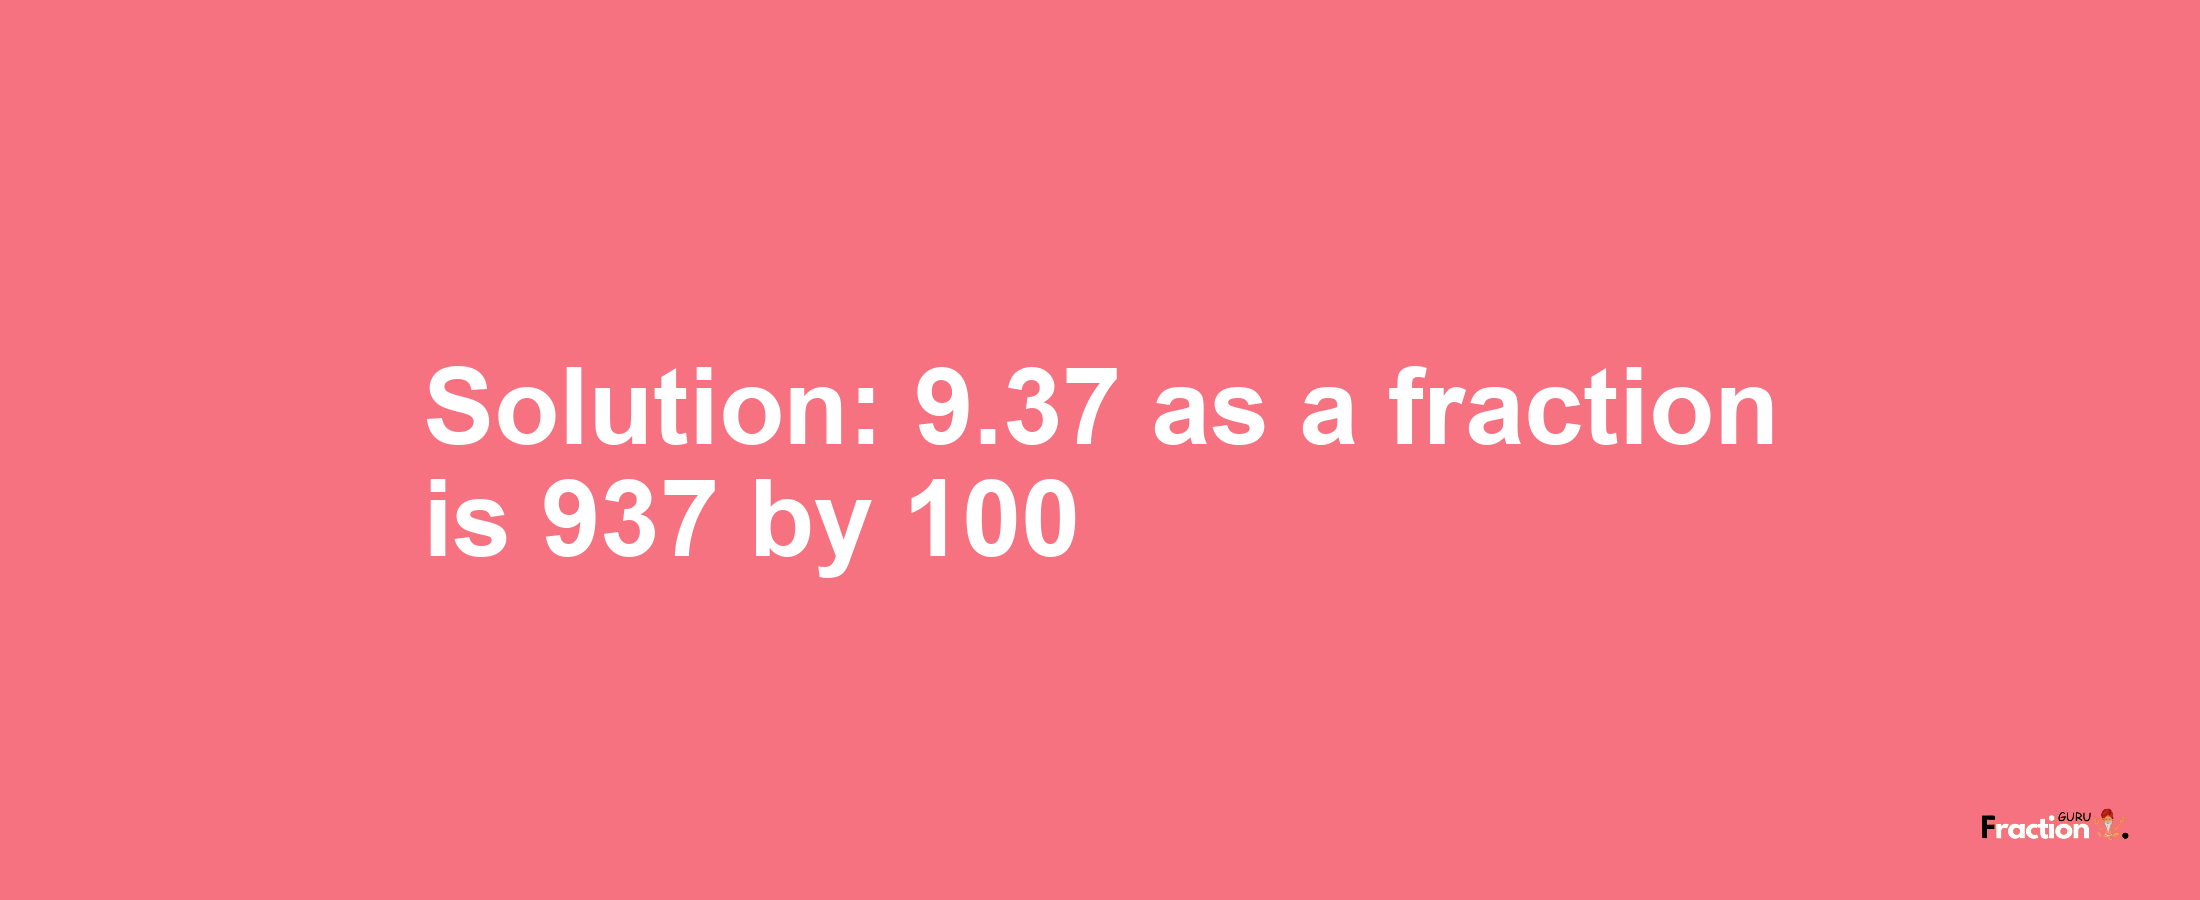 Solution:9.37 as a fraction is 937/100